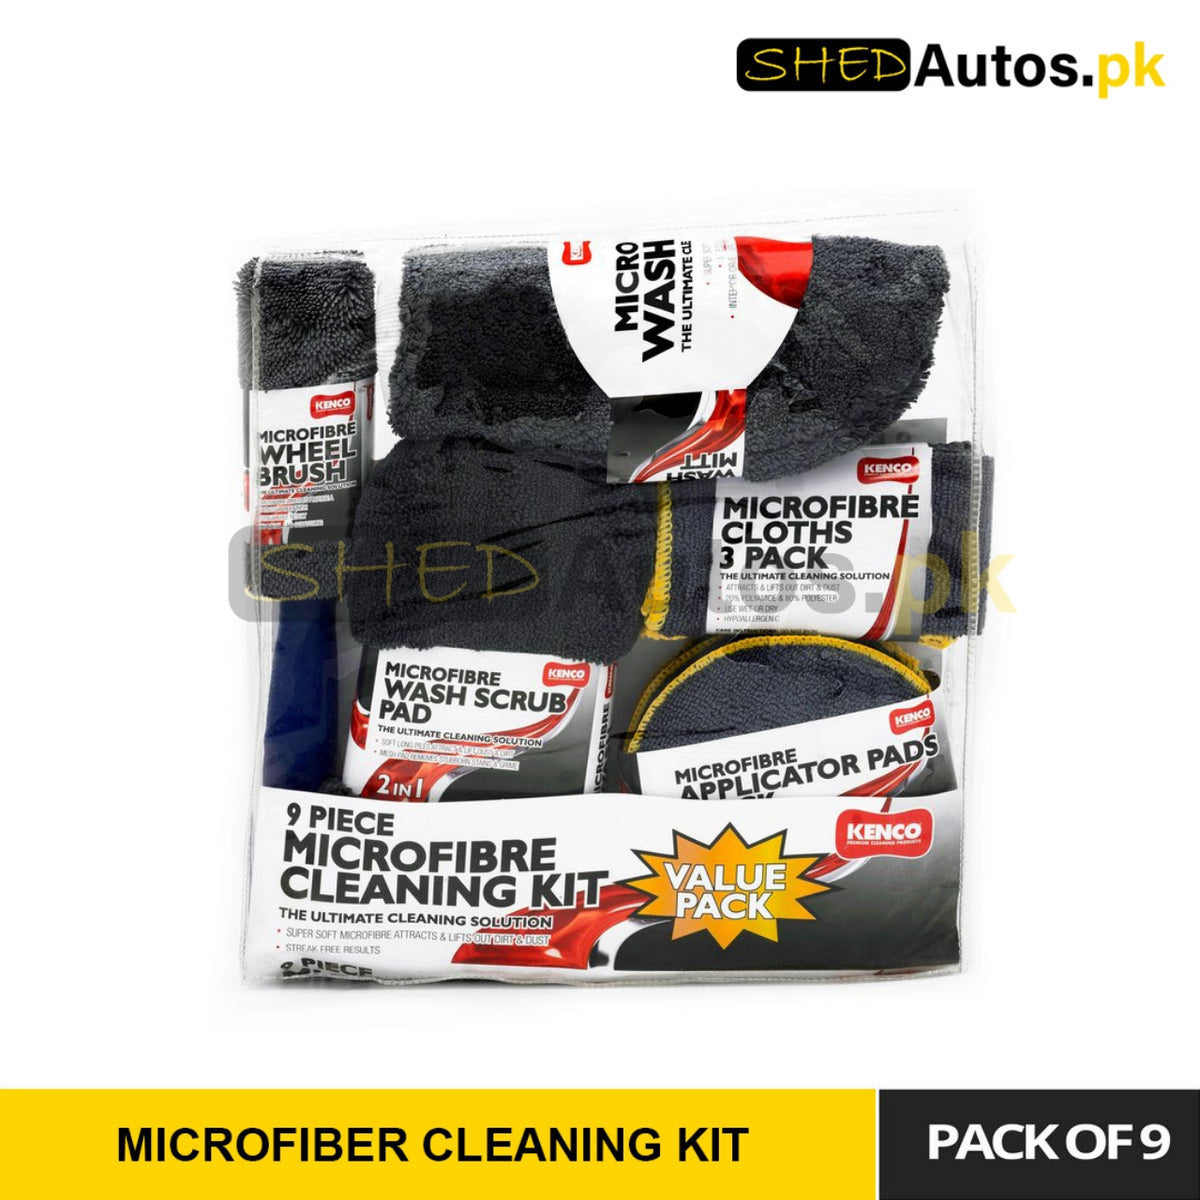 Pack of 9 Ultimate Microfiber Cleaning Kit